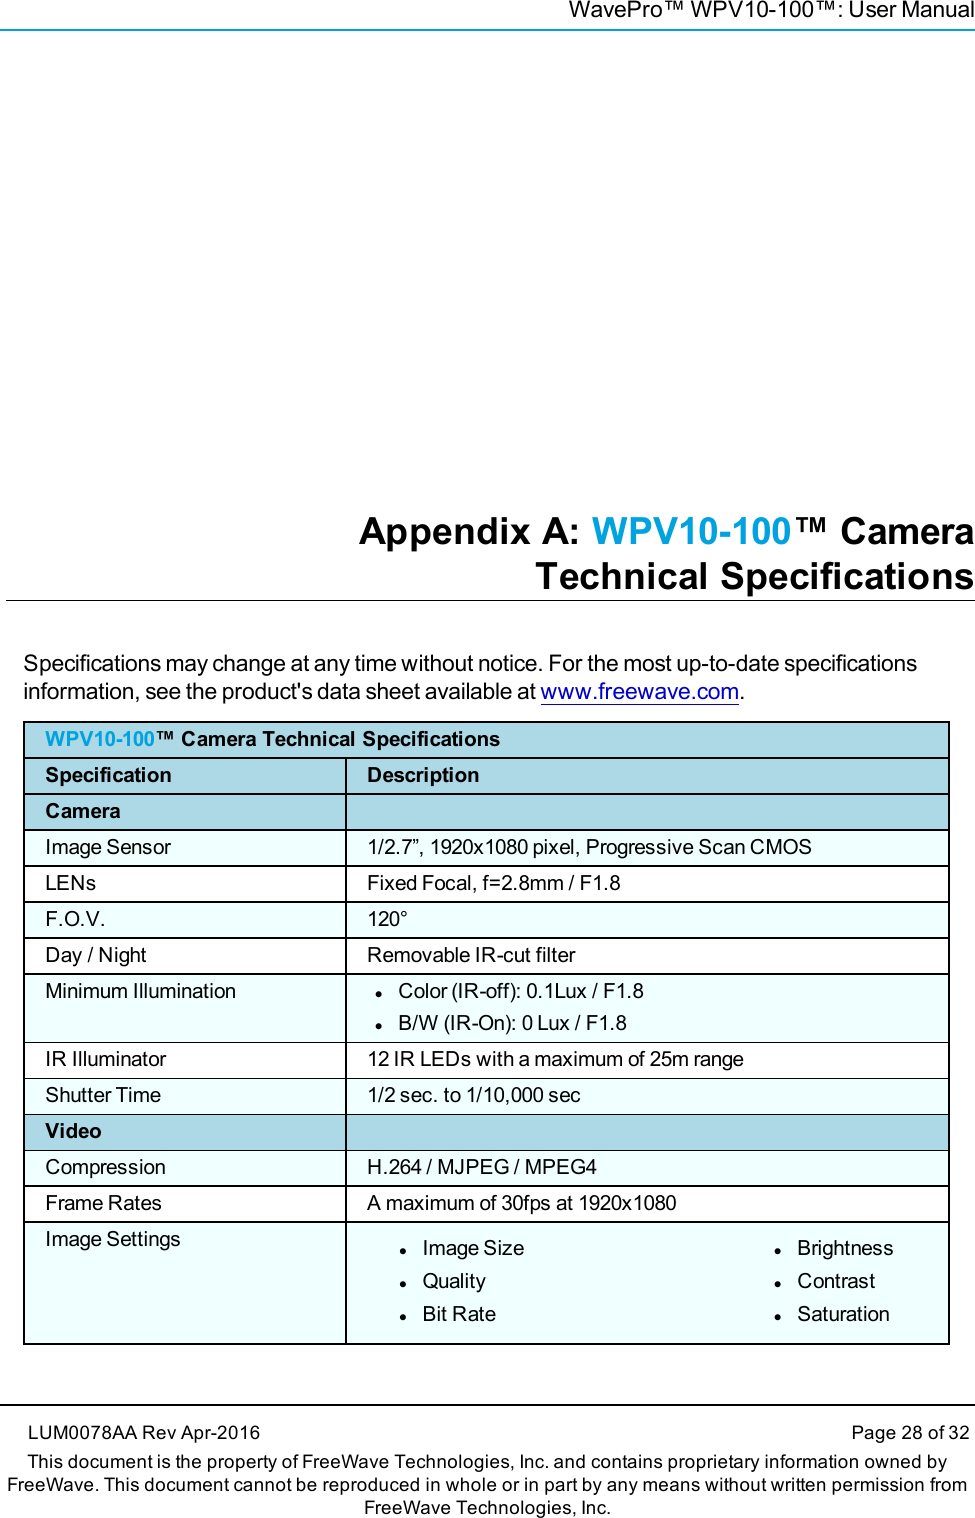 WavePro™ WPV10-100™: User ManualAppendix A: WPV10-100™ CameraTechnical SpecificationsSpecifications may change at any time without notice. For the most up-to-date specificationsinformation, see the product&apos;s data sheet available at www.freewave.com.WPV10-100™ Camera Technical SpecificationsSpecification DescriptionCameraImage Sensor 1/2.7”, 1920x1080 pixel, Progressive Scan CMOSLENs Fixed Focal, f=2.8mm / F1.8F.O.V. 120°Day / Night Removable IR-cut filterMinimum Illumination lColor (IR-off): 0.1Lux / F1.8lB/W (IR-On): 0 Lux / F1.8IR Illuminator 12 IR LEDs with a maximum of 25m rangeShutter Time 1/2 sec. to 1/10,000 secVideoCompression H.264 / MJPEG / MPEG4Frame Rates A maximum of 30fps at 1920x1080Image Settings lImage SizelQualitylBit RatelBrightnesslContrastlSaturationLUM0078AA Rev Apr-2016 Page 28 of 32This document is the property of FreeWave Technologies, Inc. and contains proprietary information owned byFreeWave. This document cannot be reproduced in whole or in part by any means without written permission fromFreeWave Technologies, Inc.